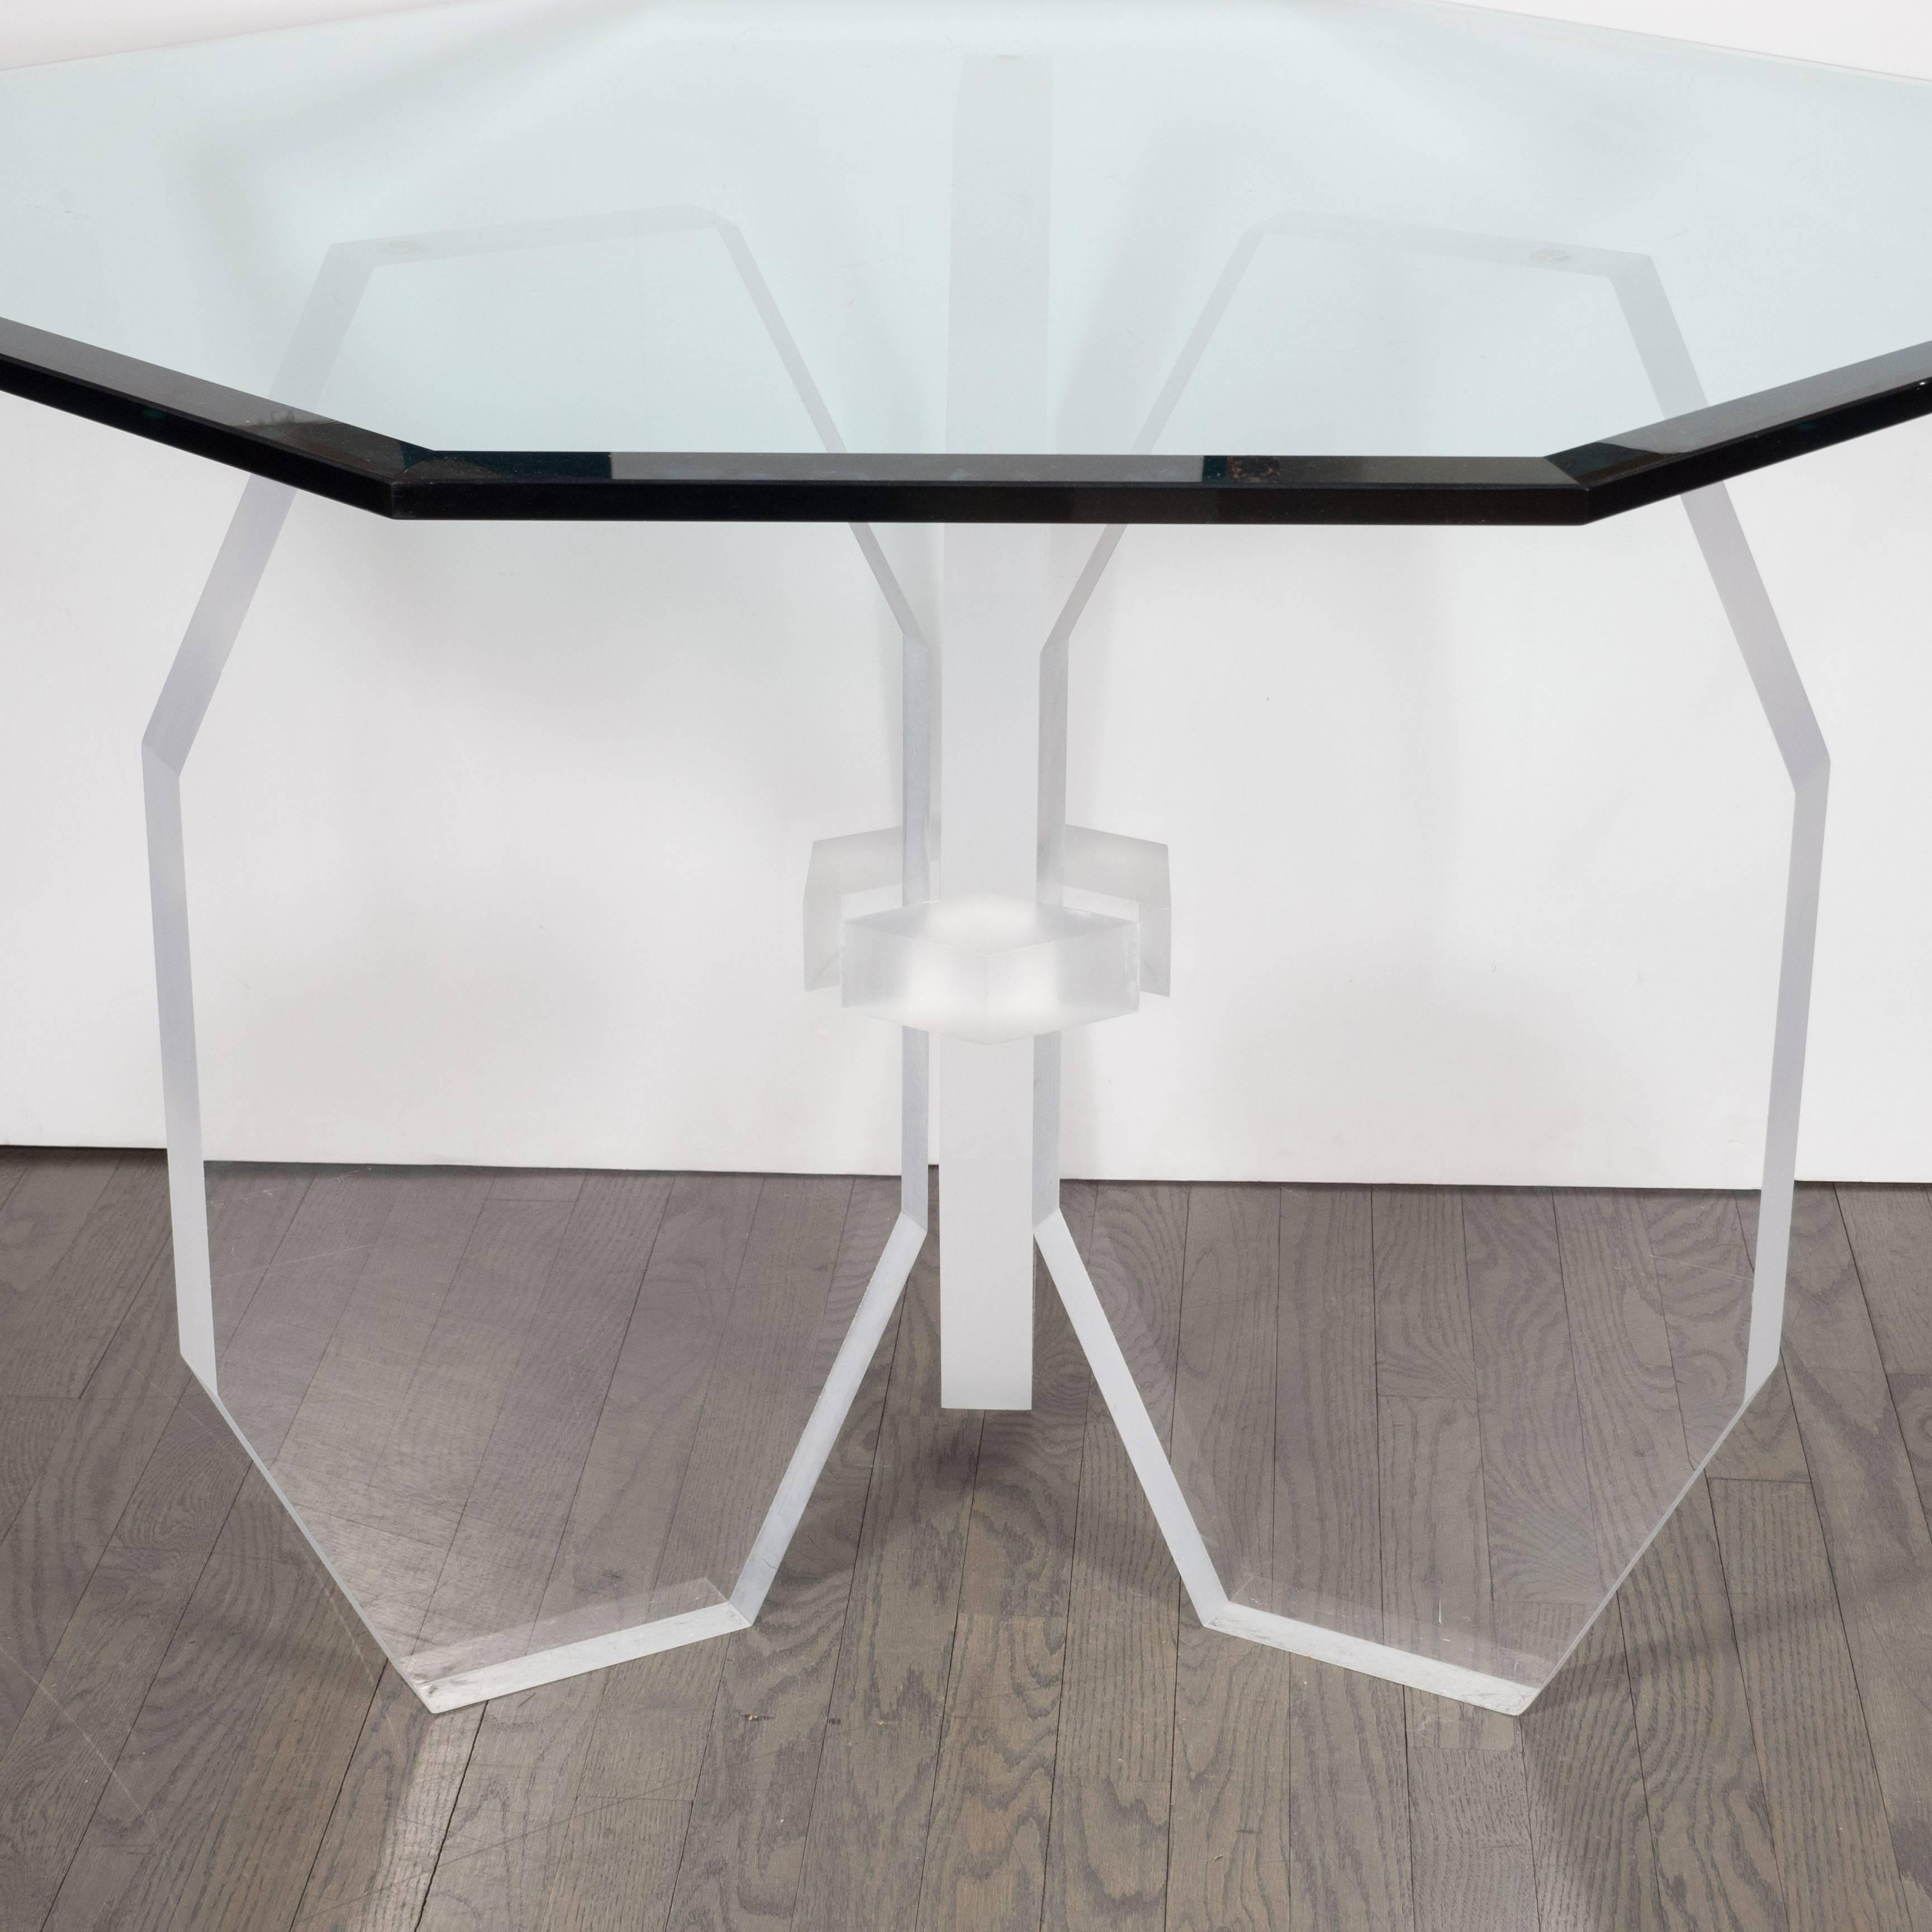 A Mid-Century modernist dining table with a sculptural base consisting of three octagonal faceted panels pinned together by a center piece of frosted Lucite. The faceted design of the base is emulated in the octagonal beveled glass tabletop. Being